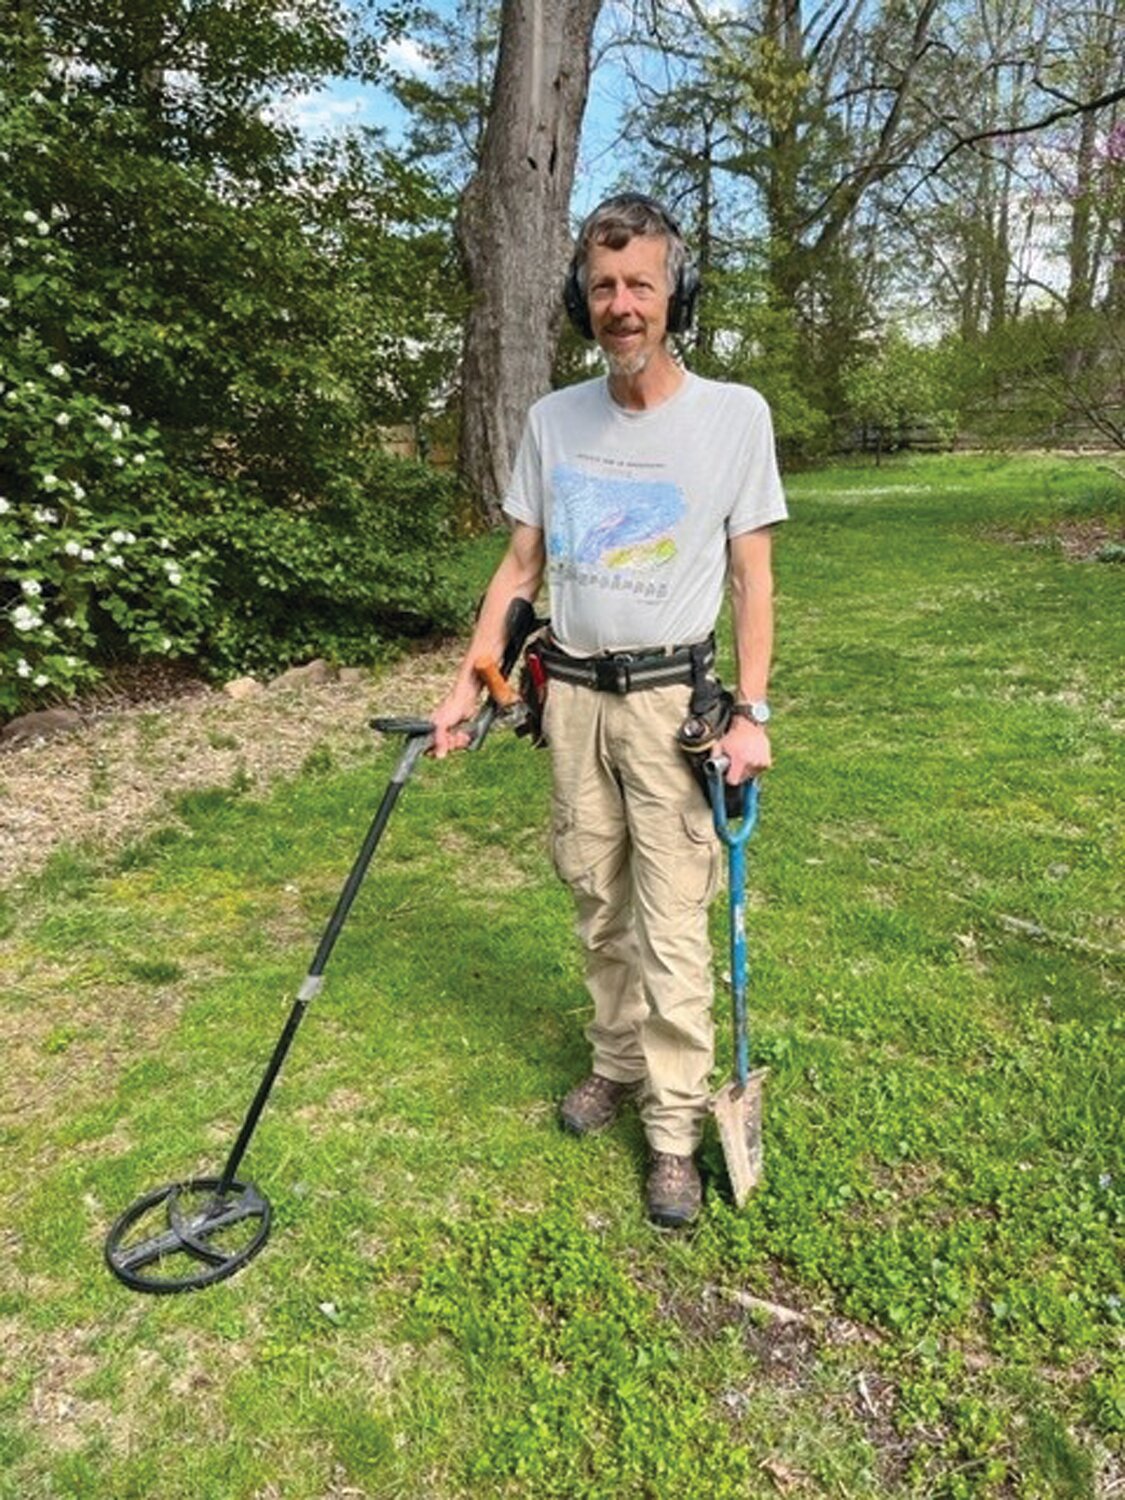 Philip S. Getty, with his metal detecting gear, digs for history’s secrets that lay buried in the soil.